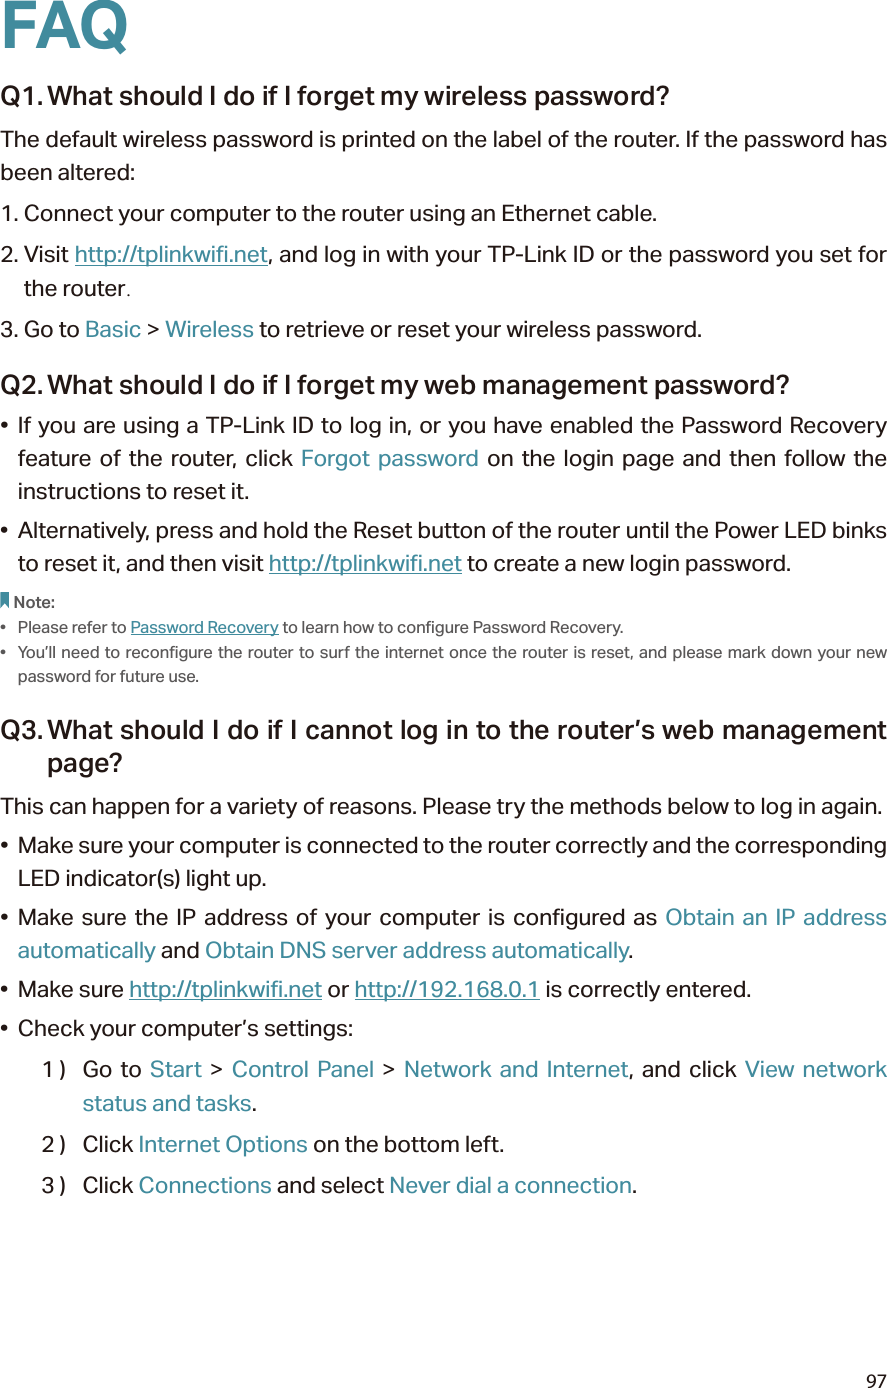 97FAQQ1. What should I do if I forget my wireless password?The default wireless password is printed on the label of the router. If the password has been altered:1. Connect your computer to the router using an Ethernet cable. 2. Visit http://tplinkwifi.net, and log in with your TP-Link ID or the password you set for the router.3. Go to Basic &gt; Wireless to retrieve or reset your wireless password.Q2. What should I do if I forget my web management password?• If you are using a TP-Link ID to log in, or you have enabled the Password Recovery feature of the router, click Forgot password on the login page and then follow the instructions to reset it.•  Alternatively, press and hold the Reset button of the router until the Power LED binks to reset it, and then visit http://tplinkwifi.net to create a new login password.Note: •  Please refer to Password Recovery to learn how to configure Password Recovery.•  You’ll need to reconfigure the router to surf the internet once the router is reset, and please mark down your new password for future use.Q3. What should I do if I cannot log in to the router’s web management page?This can happen for a variety of reasons. Please try the methods below to log in again.•  Make sure your computer is connected to the router correctly and the corresponding LED indicator(s) light up.• Make sure the IP address of your computer is configured as Obtain an IP address automatically and Obtain DNS server address automatically.• Make sure http://tplinkwifi.net or http://192.168.0.1 is correctly entered.•  Check your computer’s settings:1 )  Go  to  Start &gt; Control Panel &gt; Network and Internet, and click View network status and tasks.2 )  Click Internet Options on the bottom left.3 )  Click Connections and select Never dial a connection.